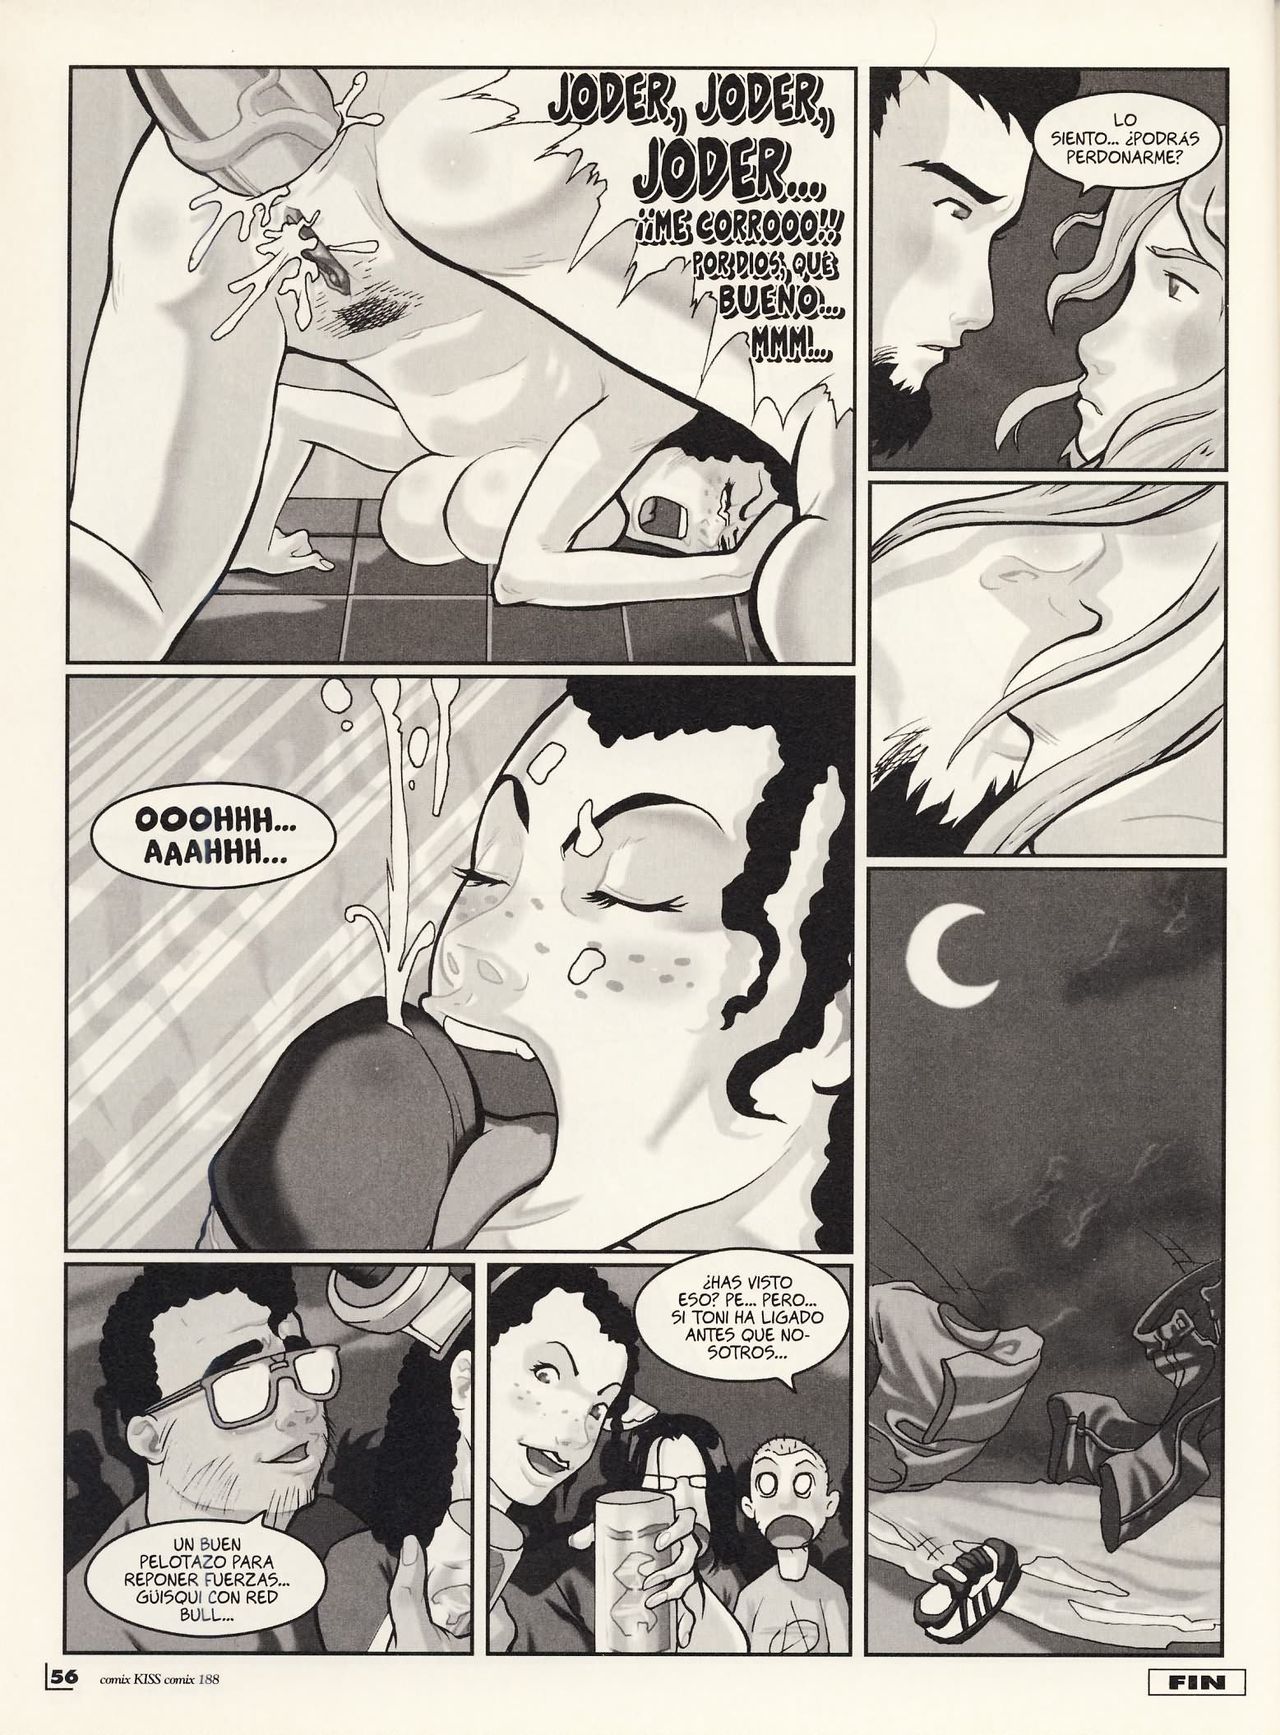 Kiss Comix 188 image number 55